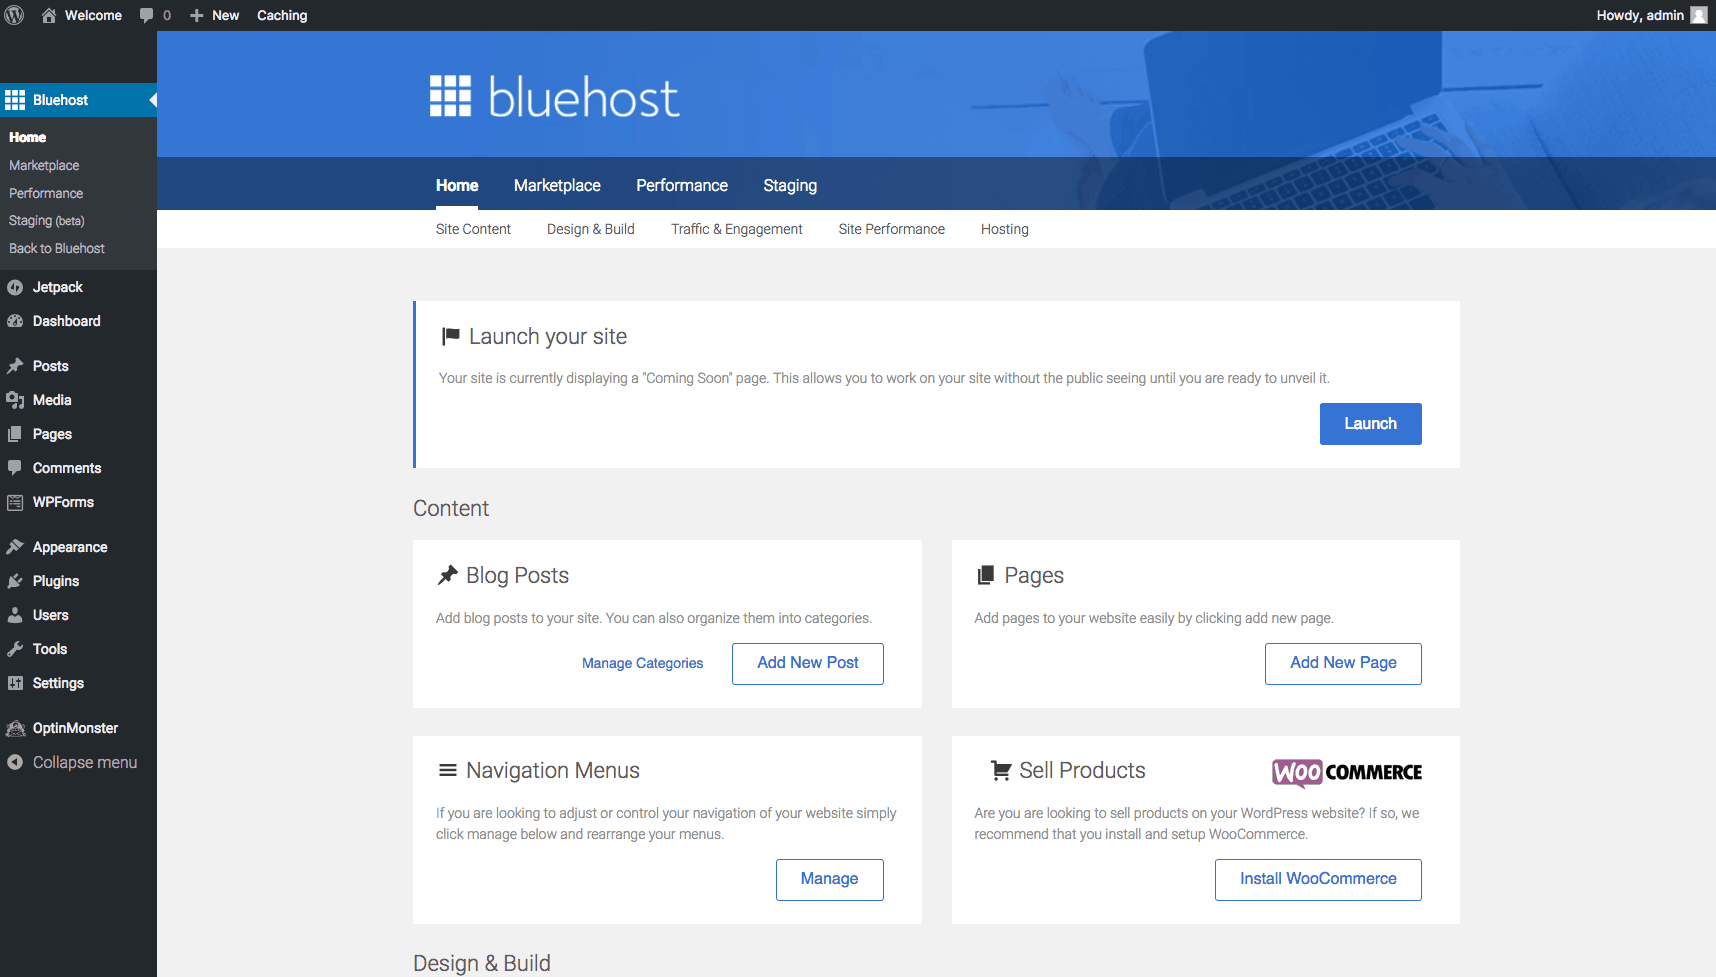 bluehost tools